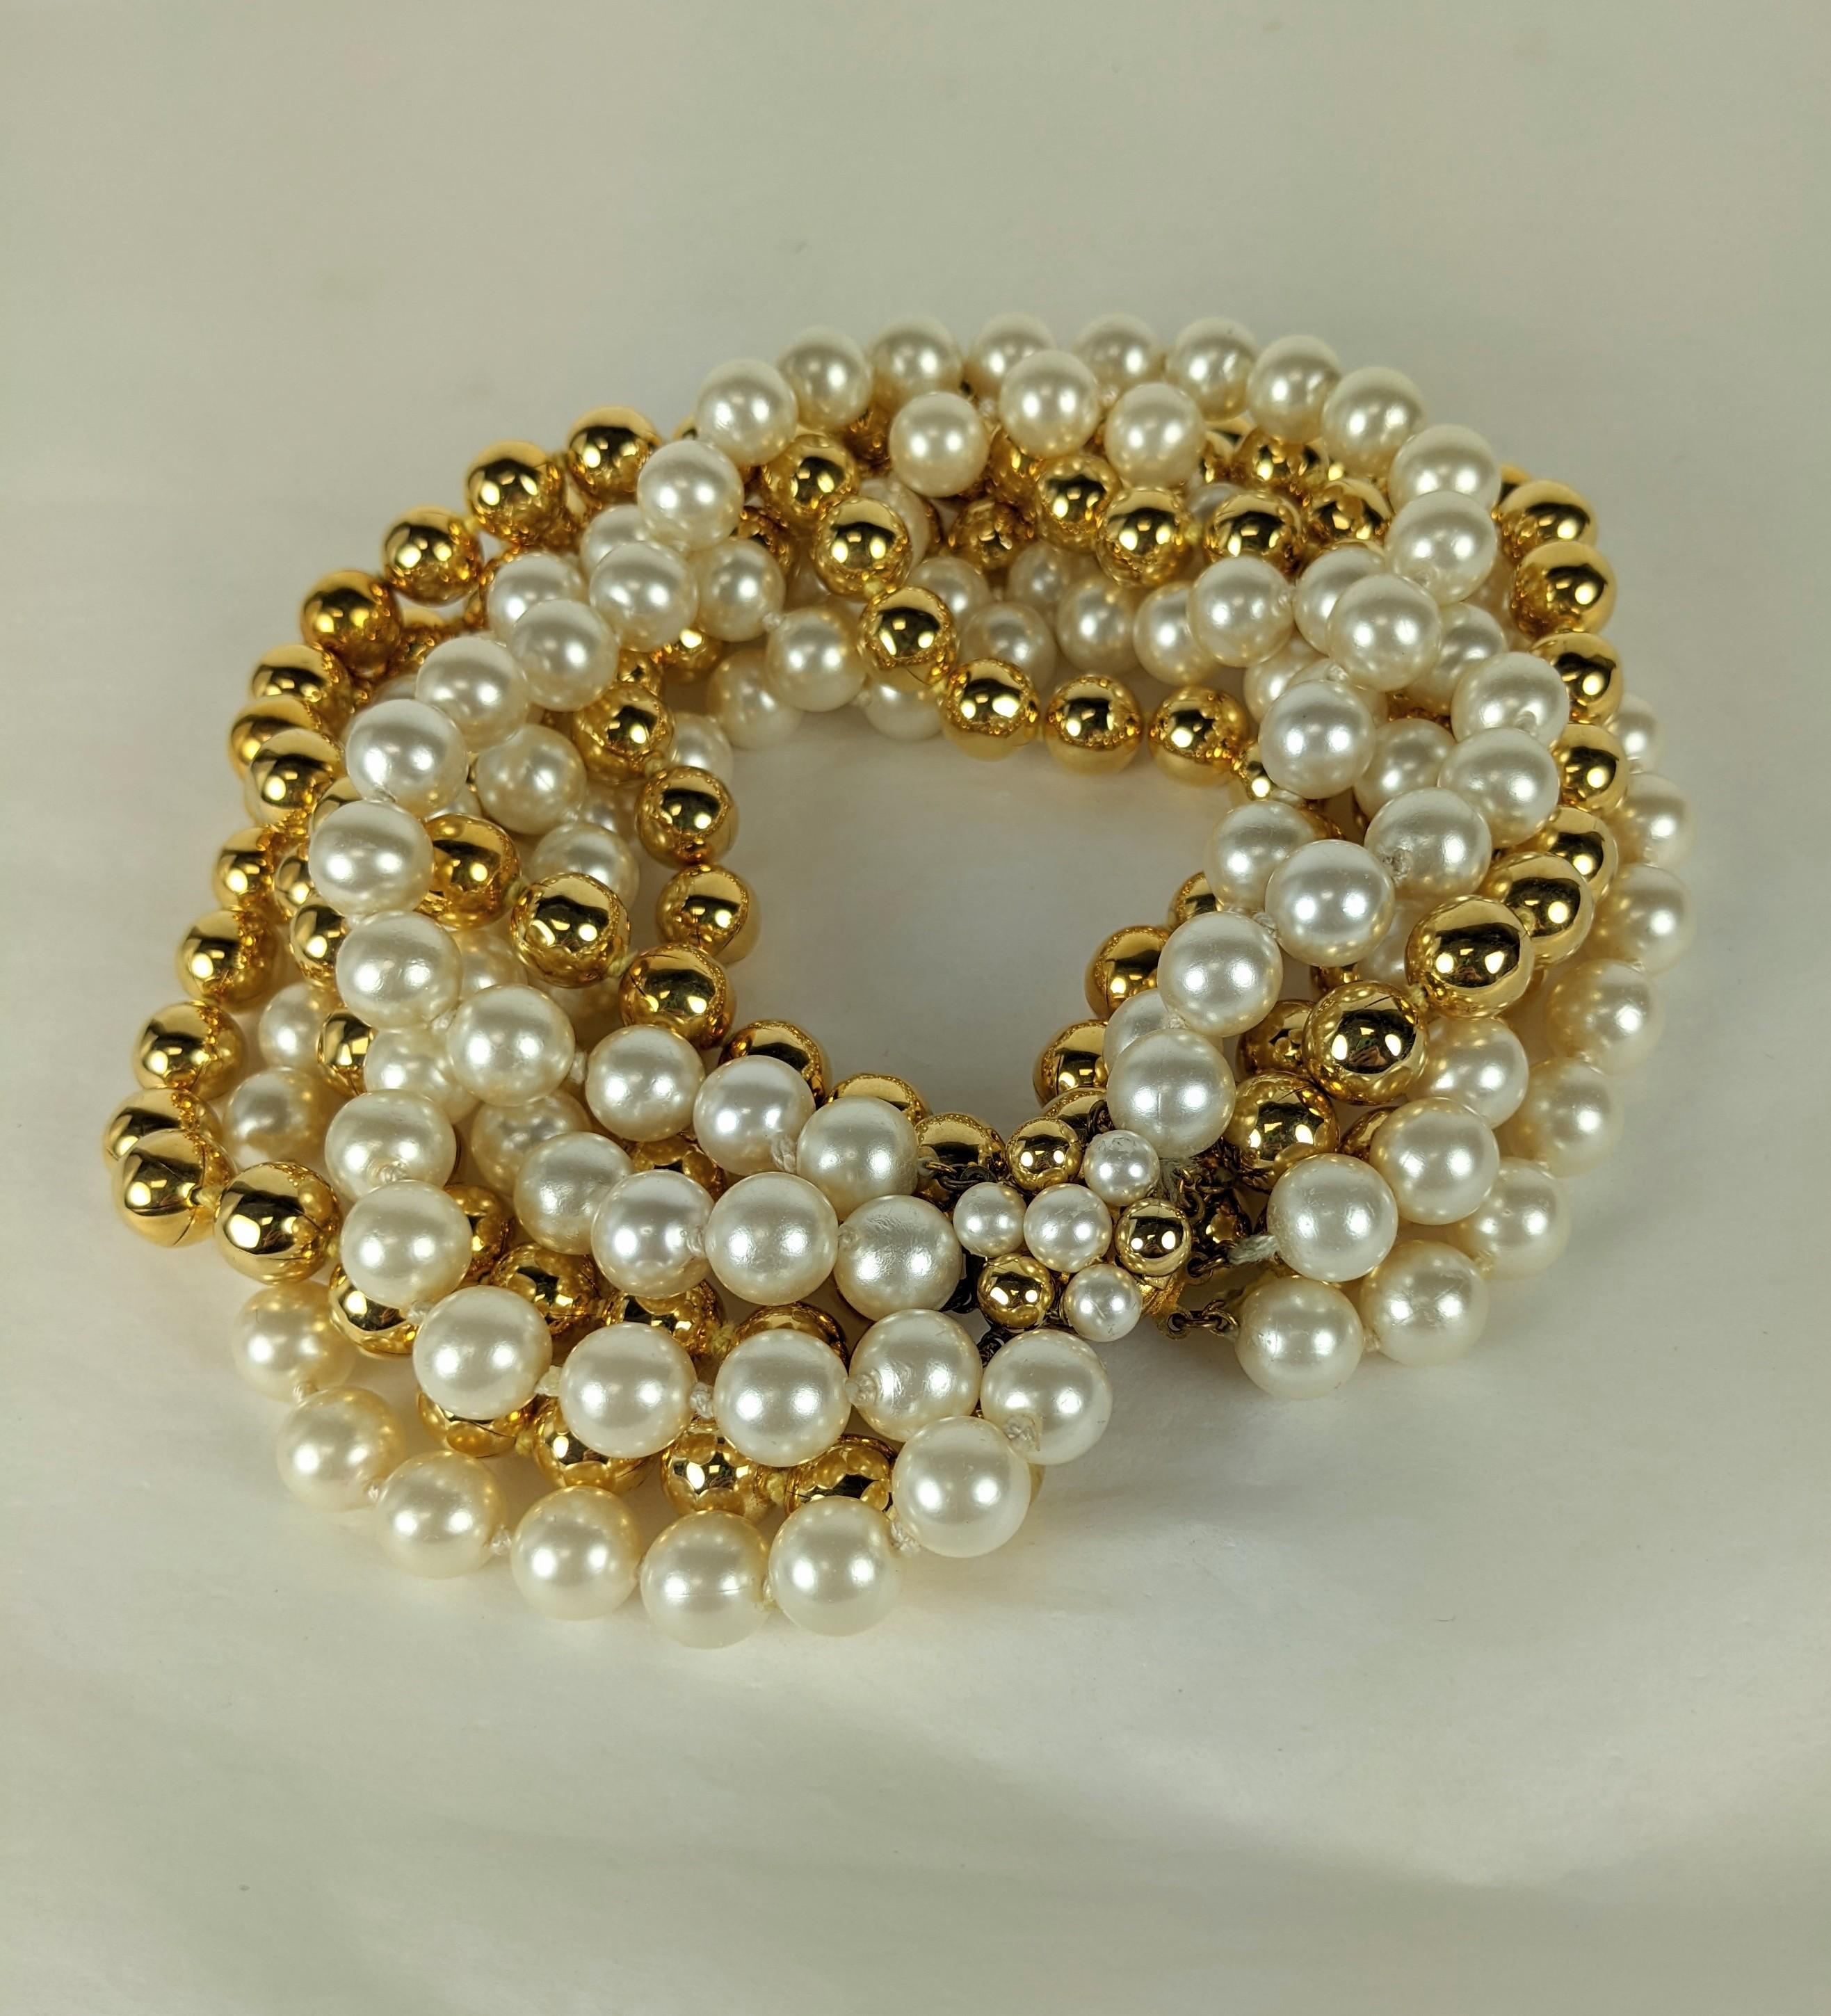 Givenchy Bunny Mellon Haute Couture multi bead loose torsade necklace. Of nacre resin pearls and golden beads which rests high on neck to wear with the severity of a simple gown or sweater in typical 50's style,  Unsigned. Tiny Size. Provenance